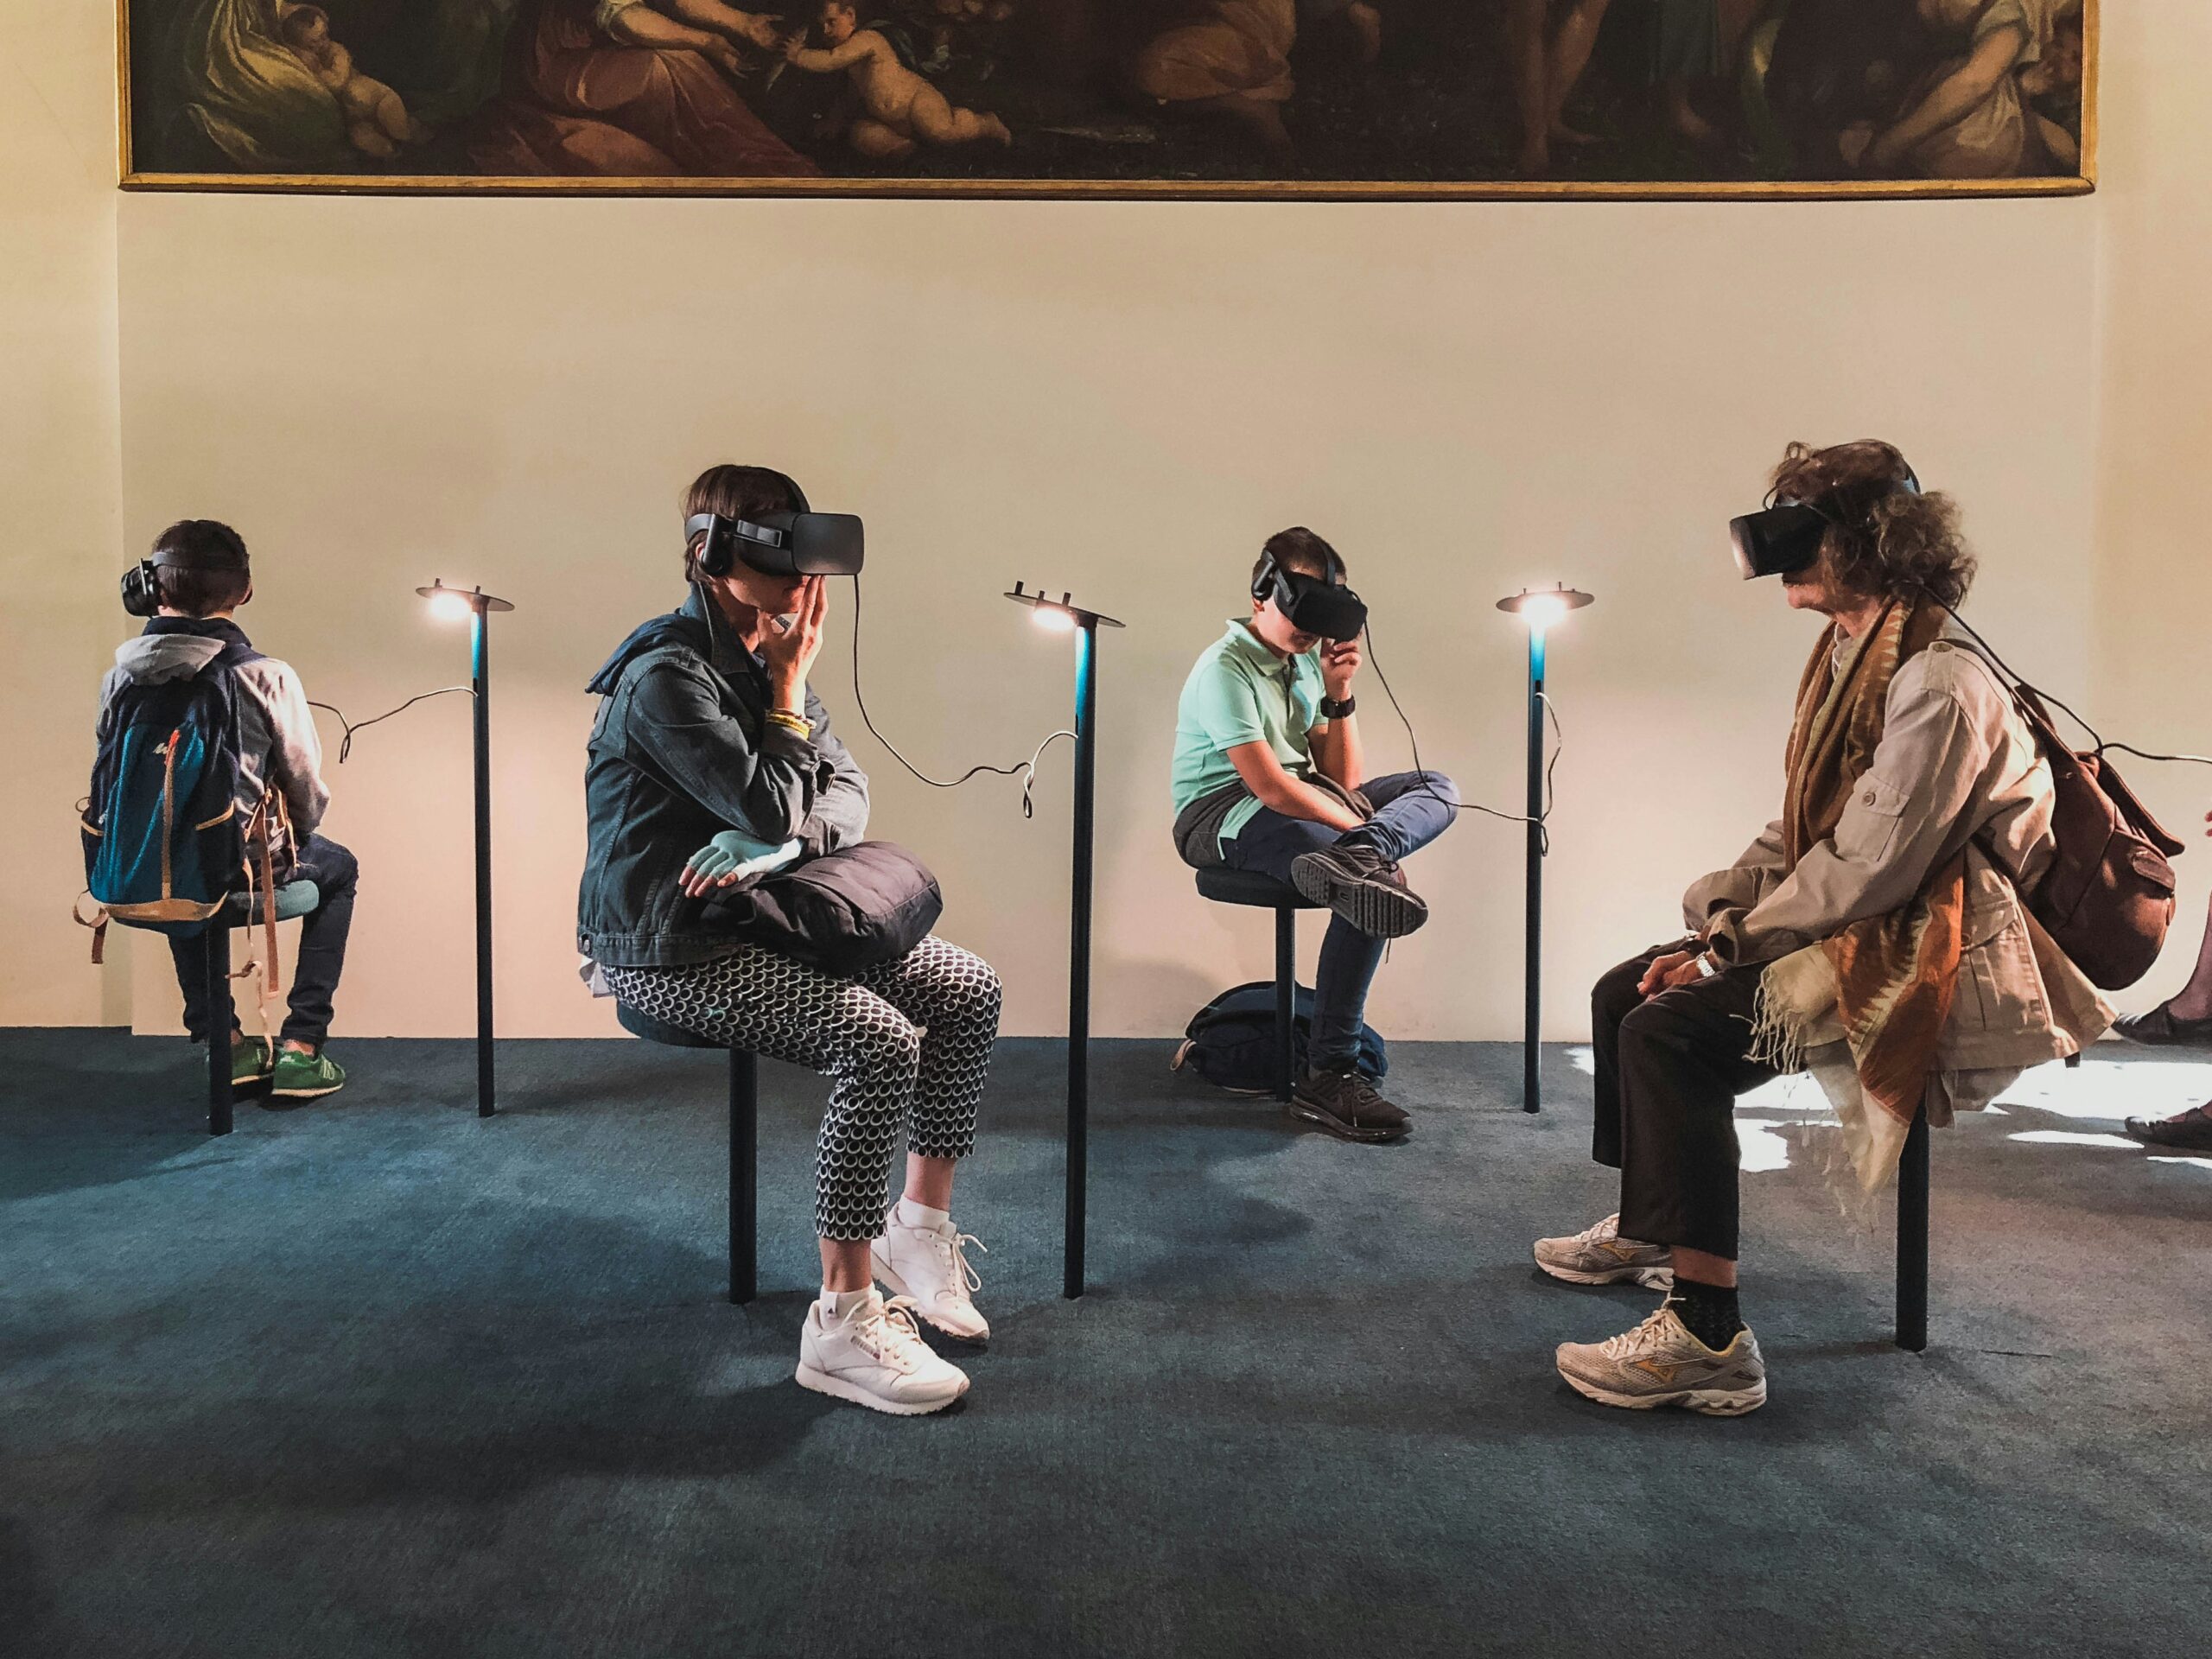 5. Social VR and Shared Experiences